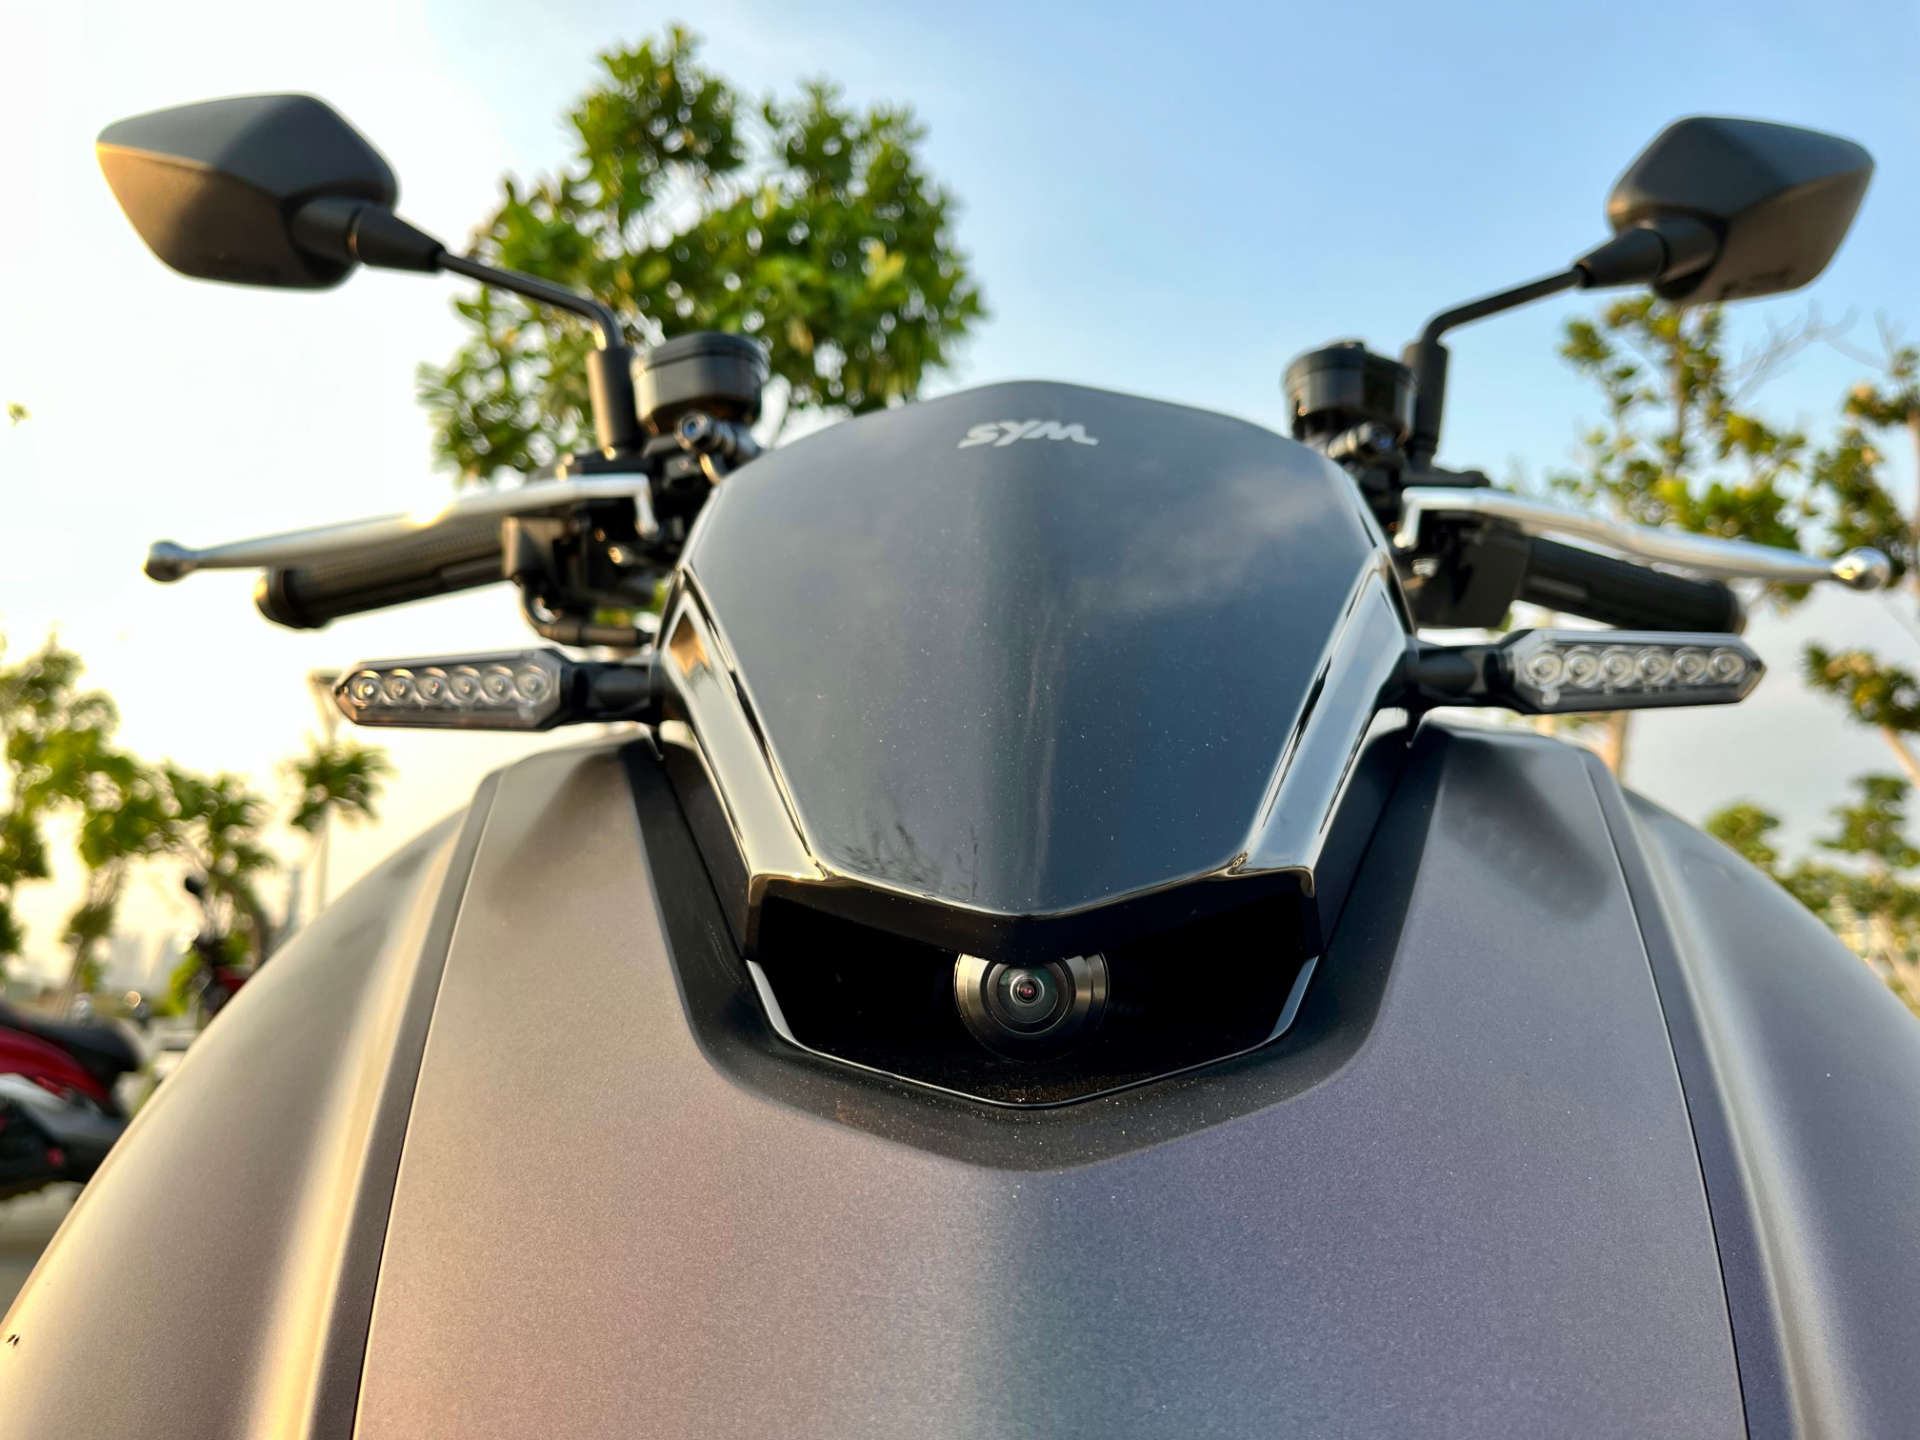 Close-up of a front-facing dashcam camera installed on an SYM MMBCU scooter.